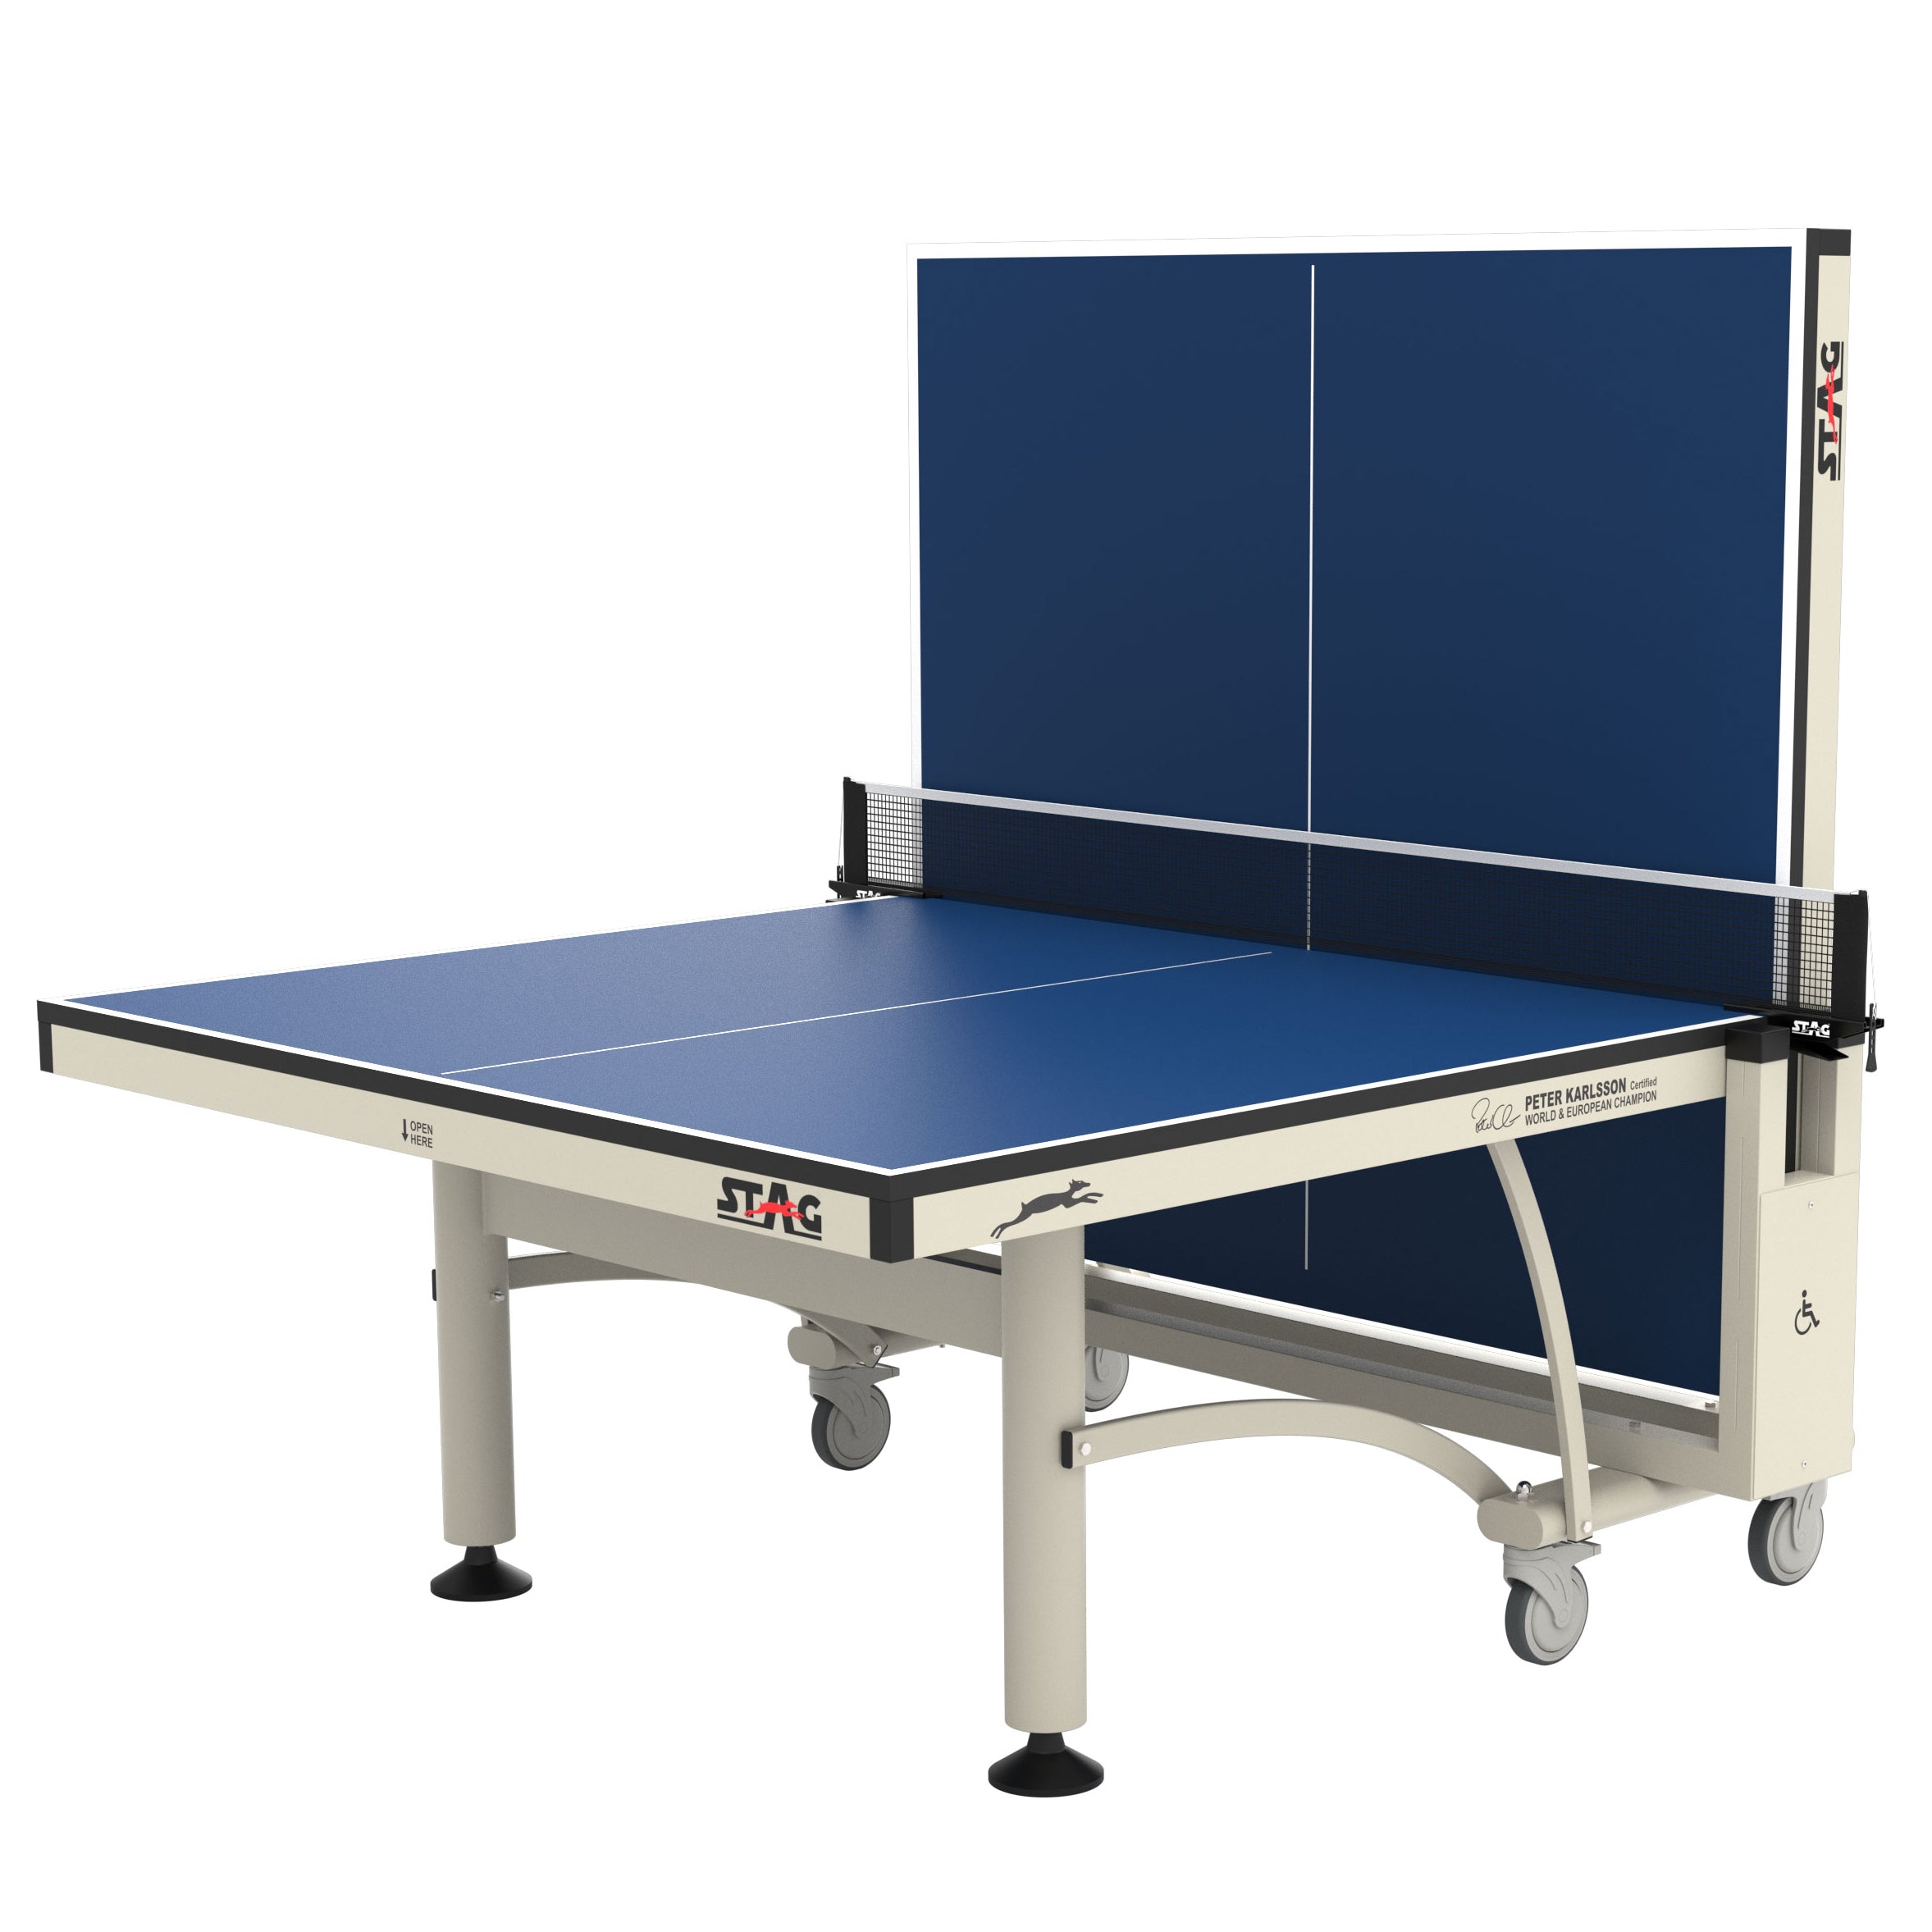 Peter Karlsson Competition Table Tennis Table